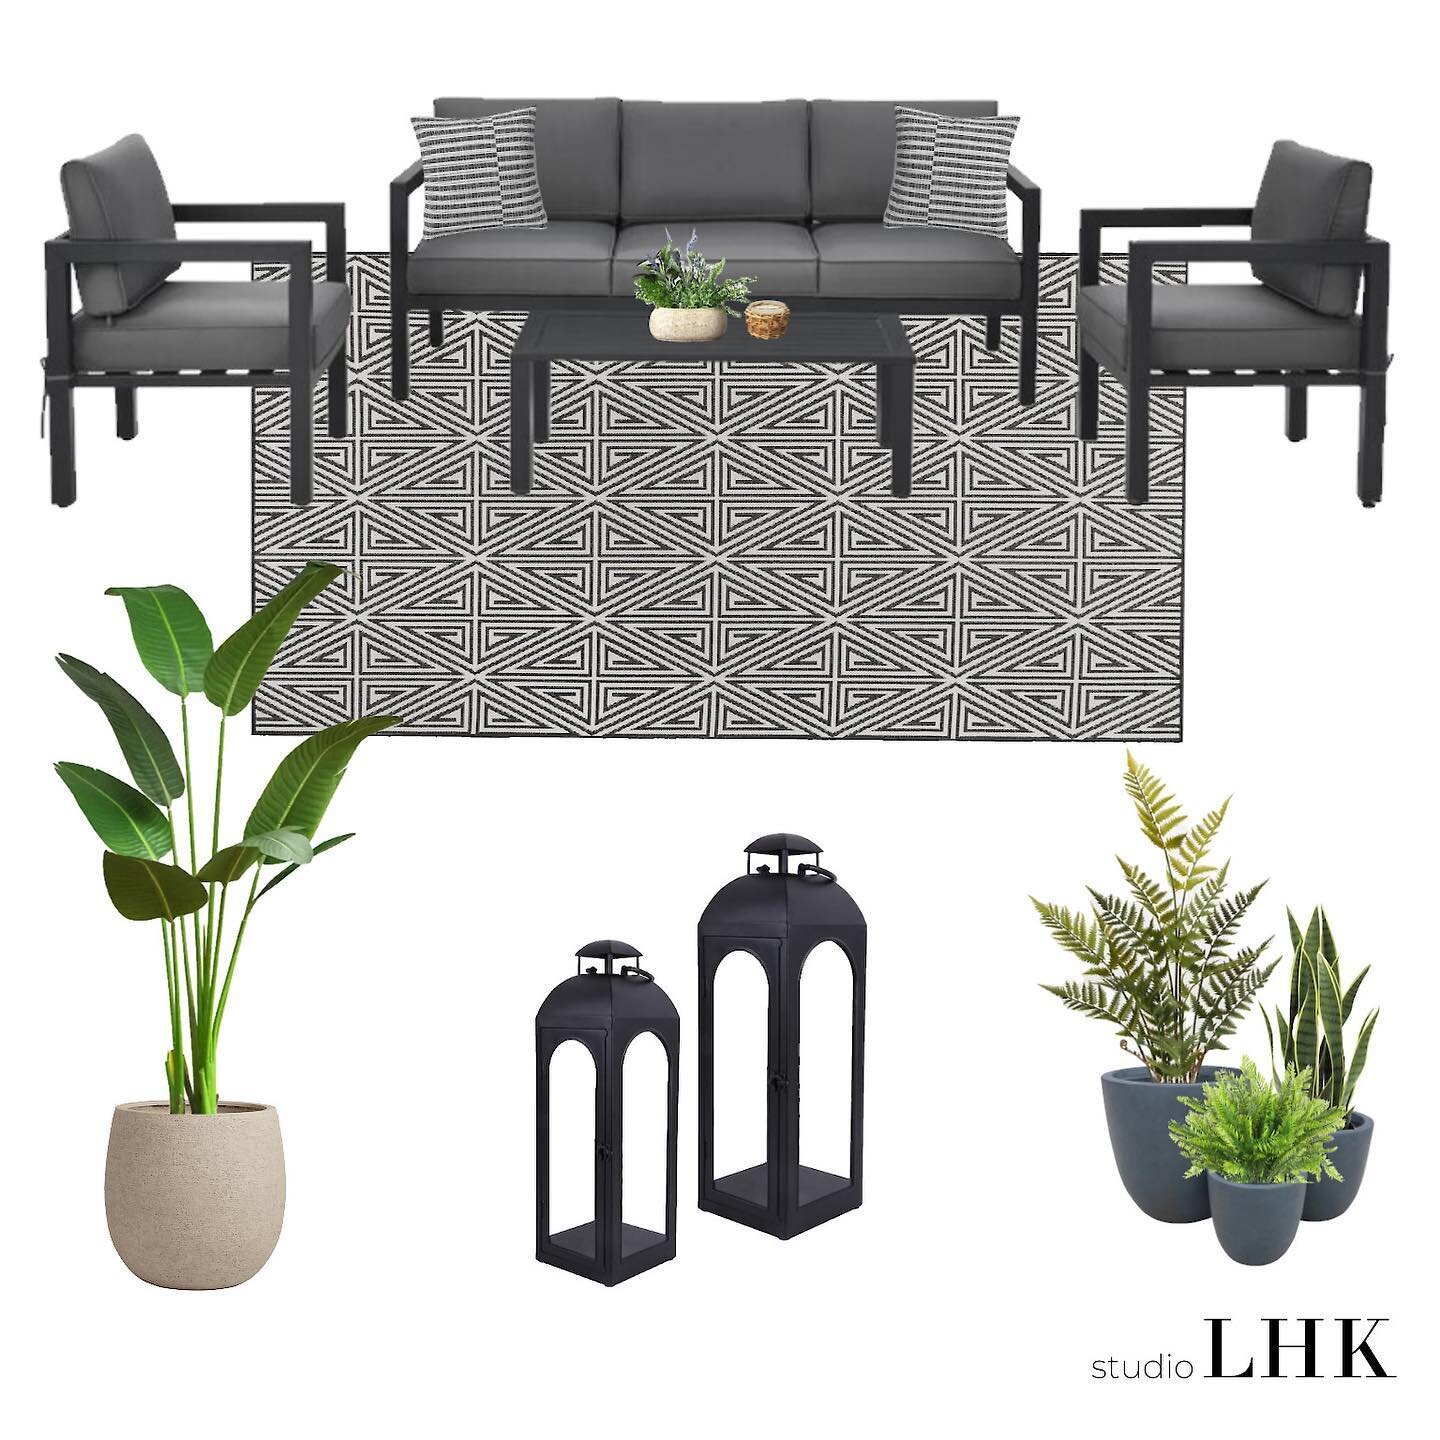 Spring is here!
Sharing a design board for my small back patio &mdash;&mdash; minimal, monochromatic, and modern🖤🤍
⠀⠀⠀⠀⠀⠀⠀ 
Head to the blog to read about 5 simple decor ideas to spruce up your outdoor spaces! Link in bio🌿
⠀⠀⠀⠀⠀⠀⠀ 
#designmoodboar